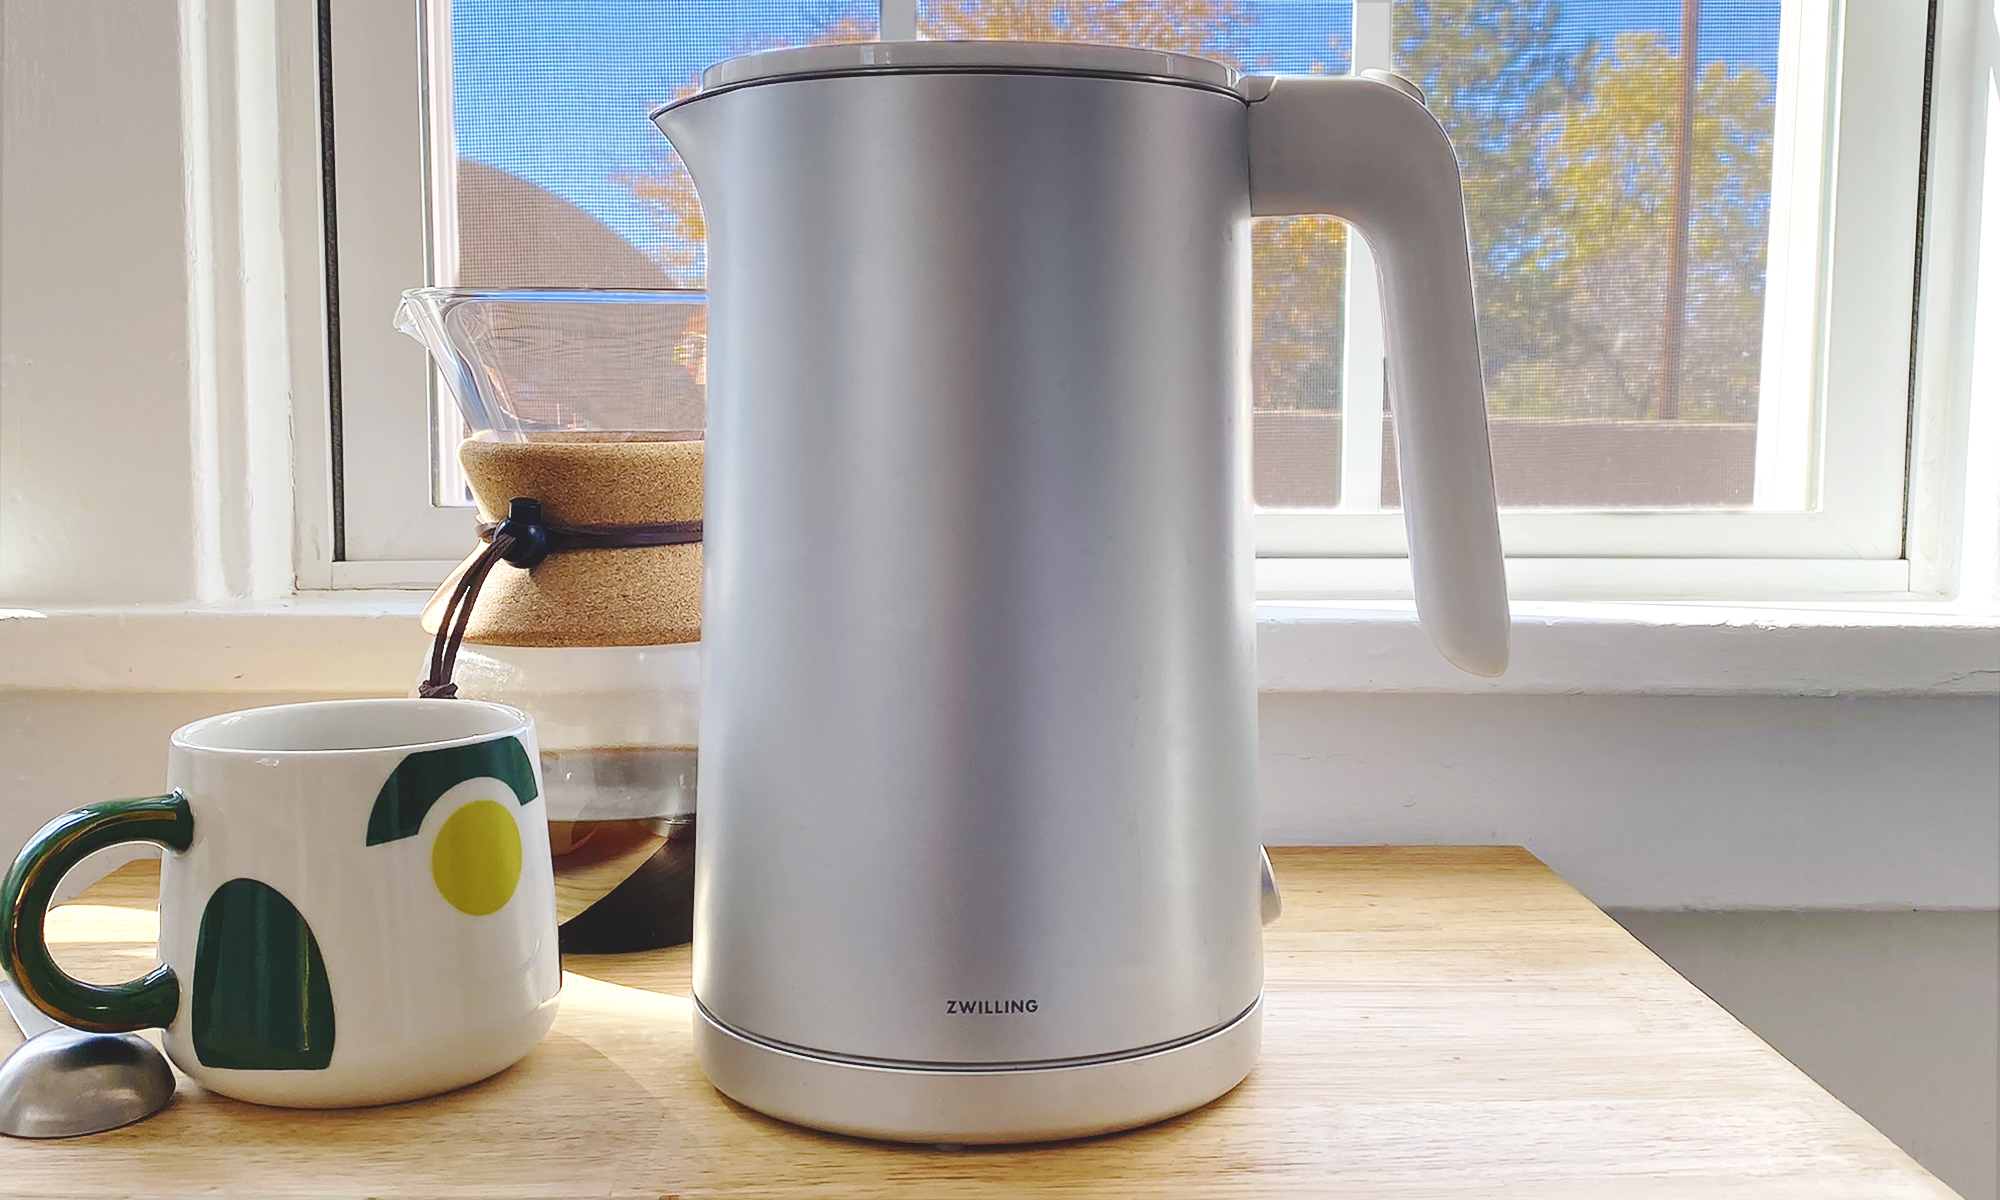 What We Bought: How Zwilling's Cool Touch Kettle Became My Most Used Kitchen Gadget